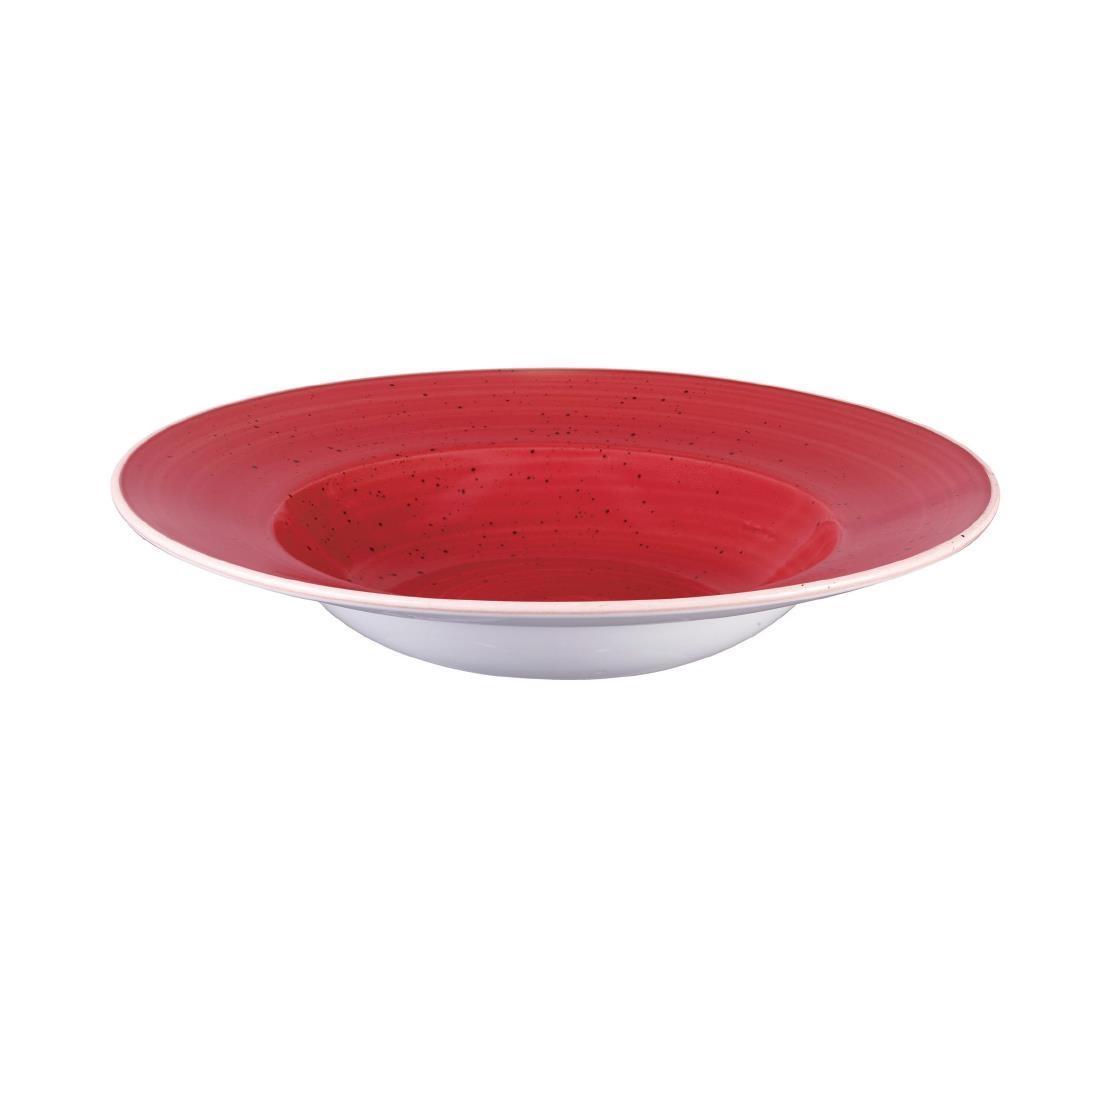 Churchill Stonecast Round Wide Rim Bowl Berry Red 240mm (Pack of 12) - DM467  - 2